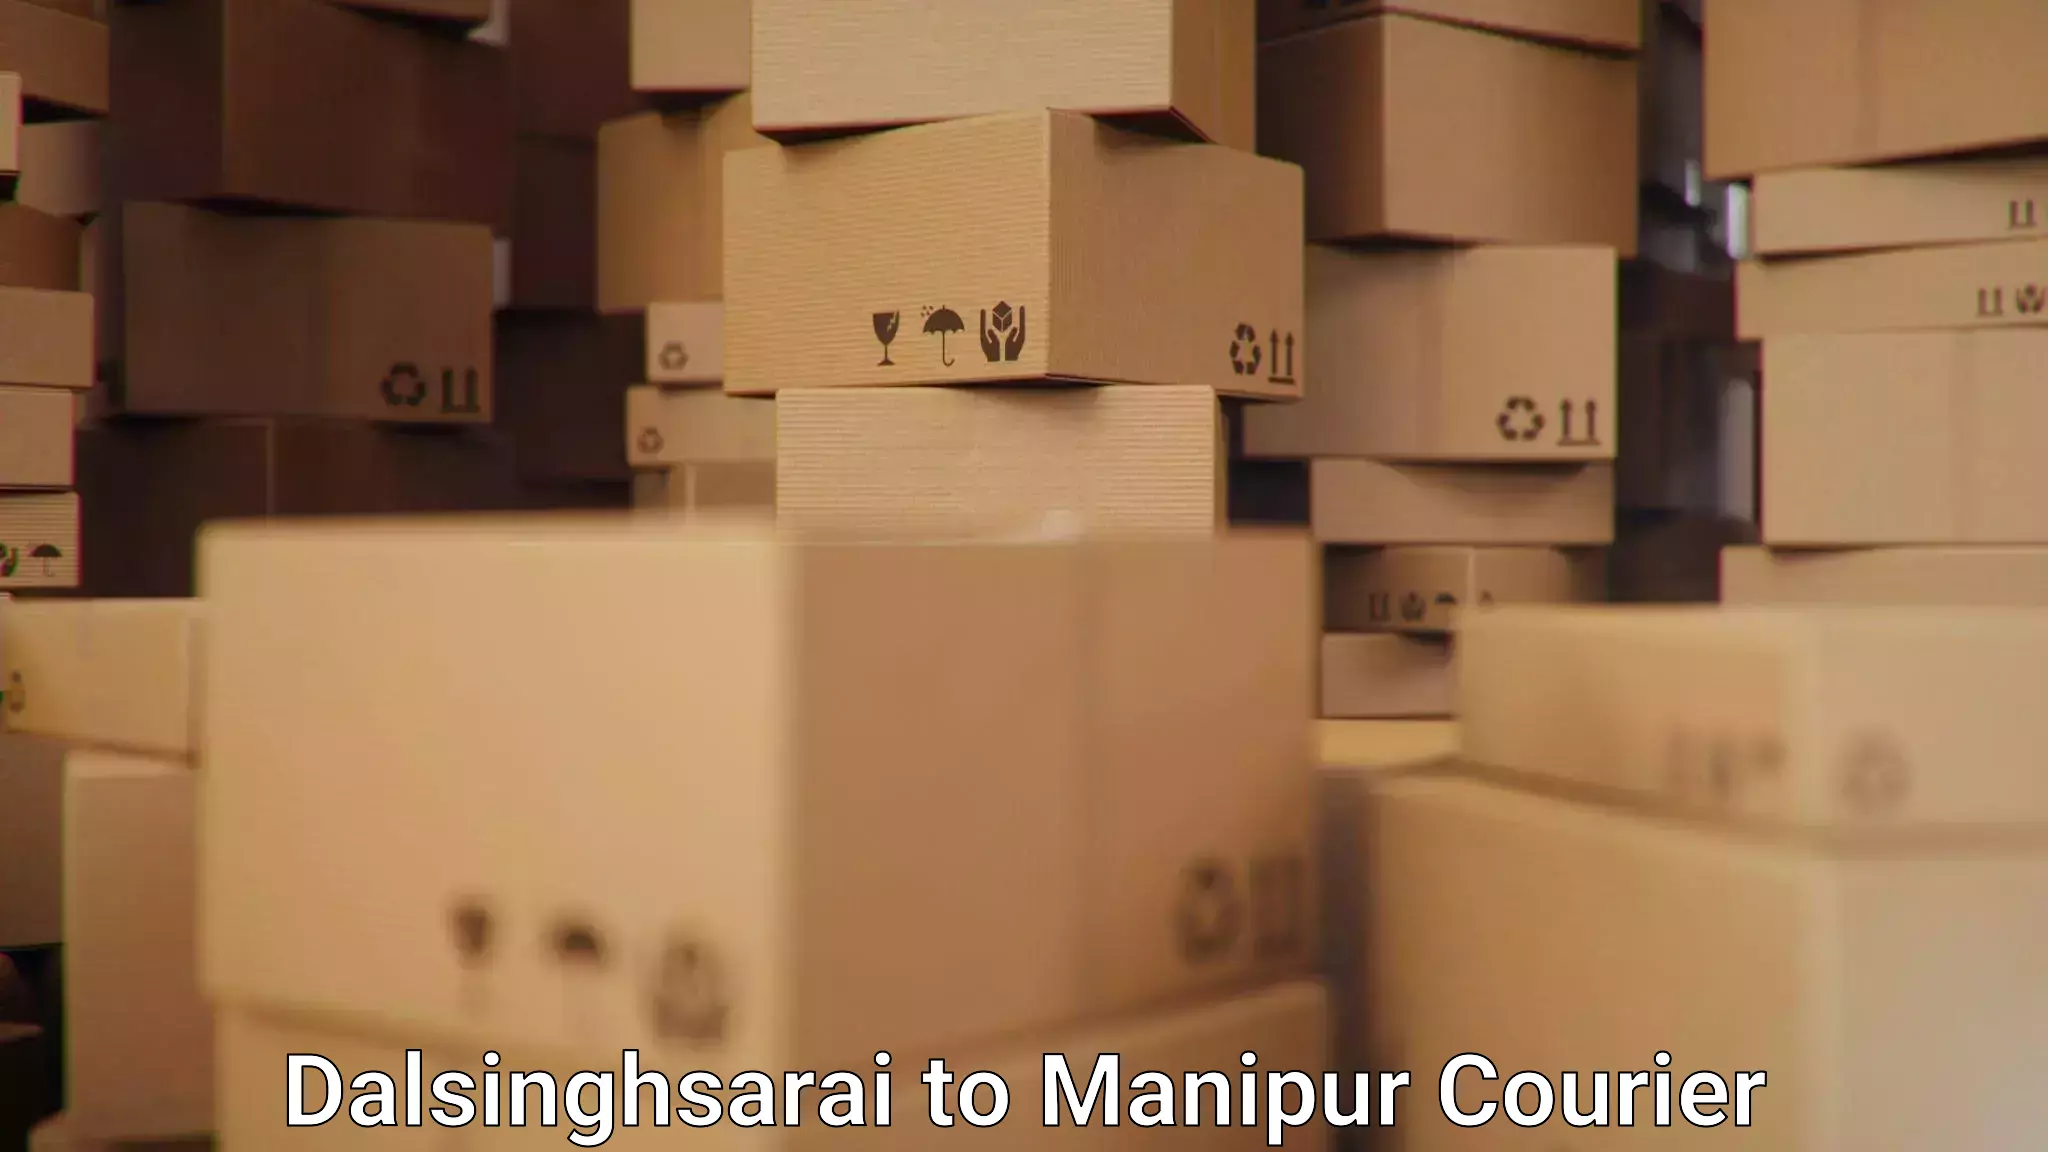 Scalable shipping solutions Dalsinghsarai to Imphal